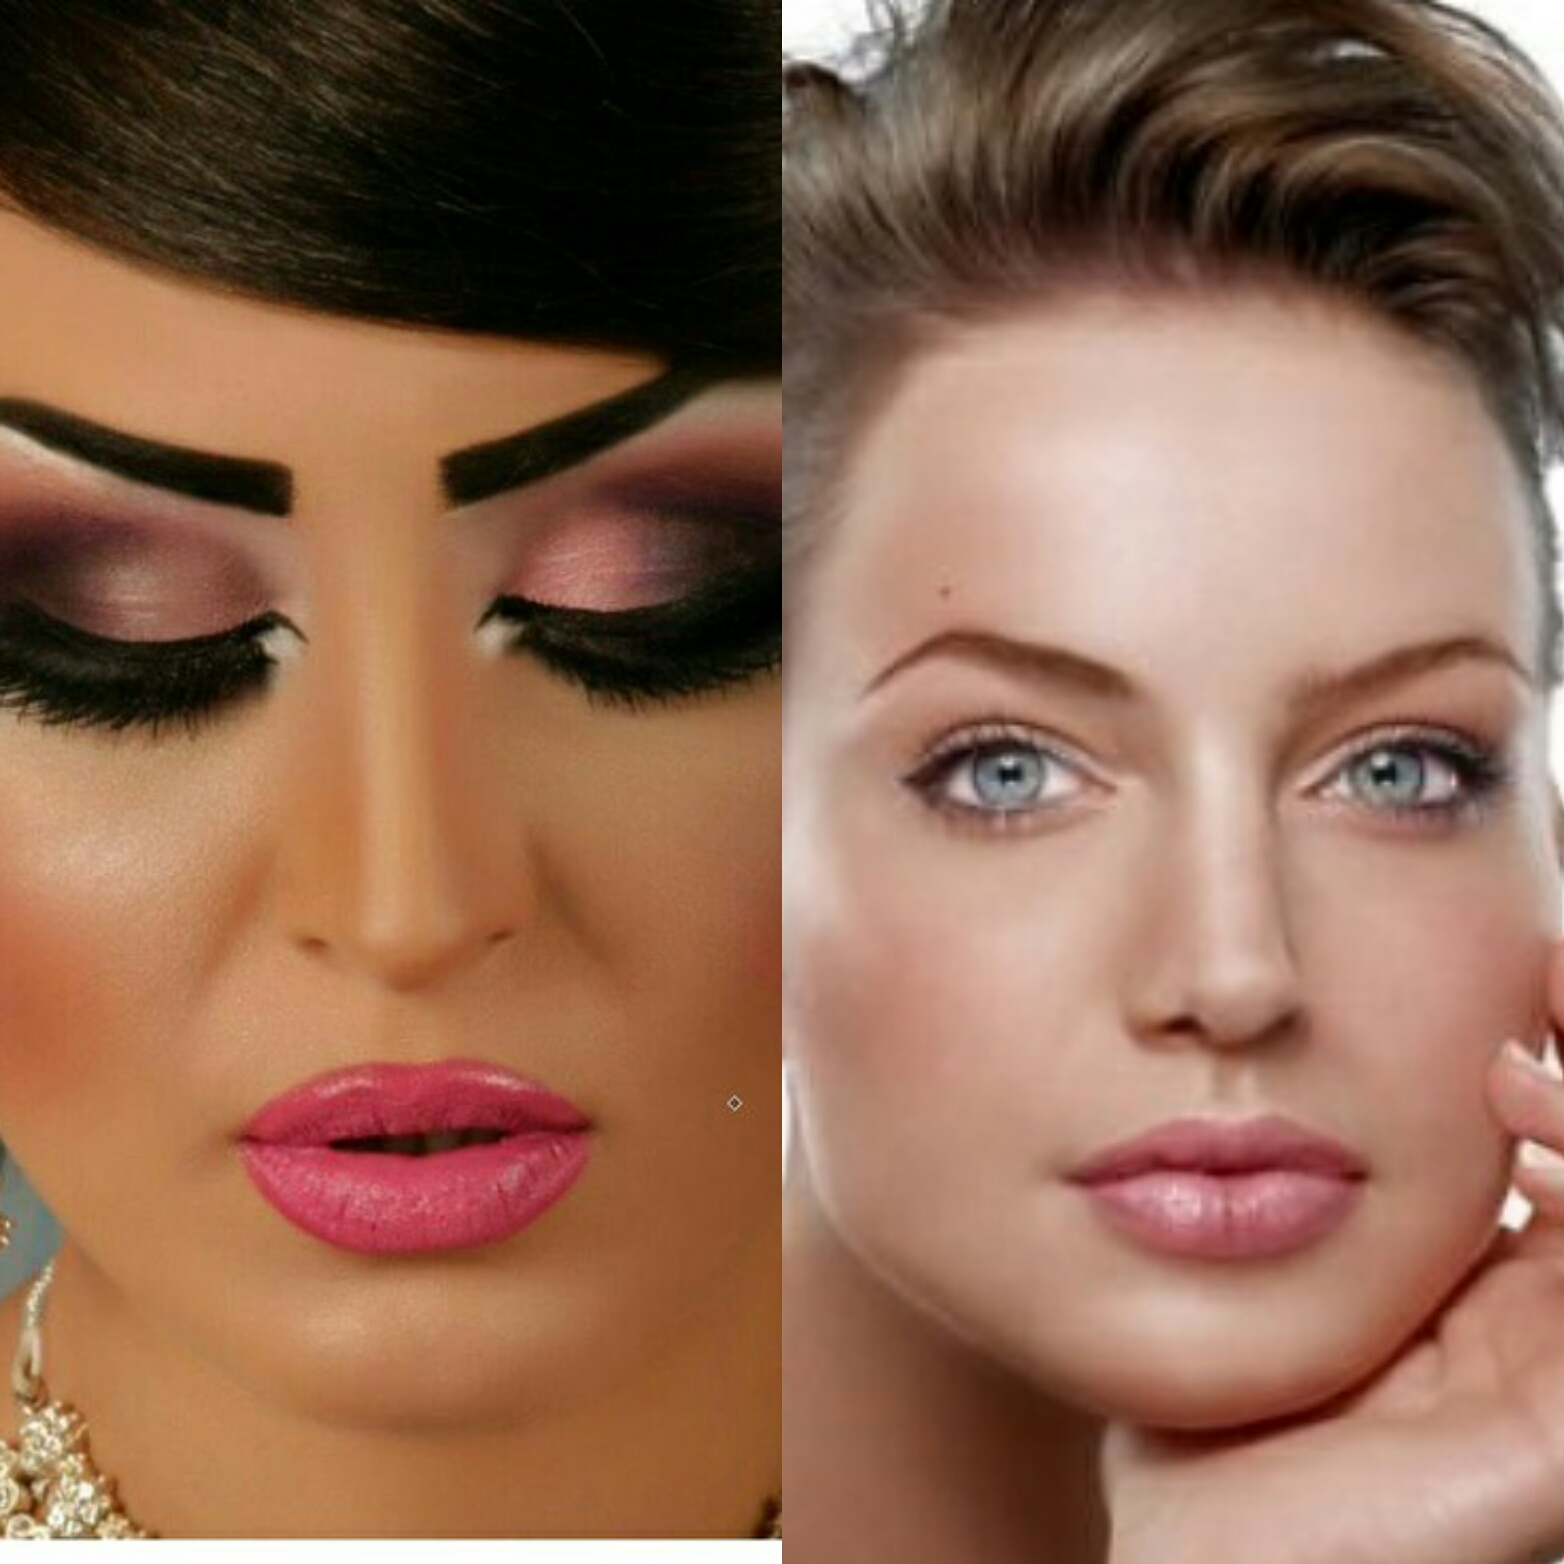 Image result for Overly done contouring: